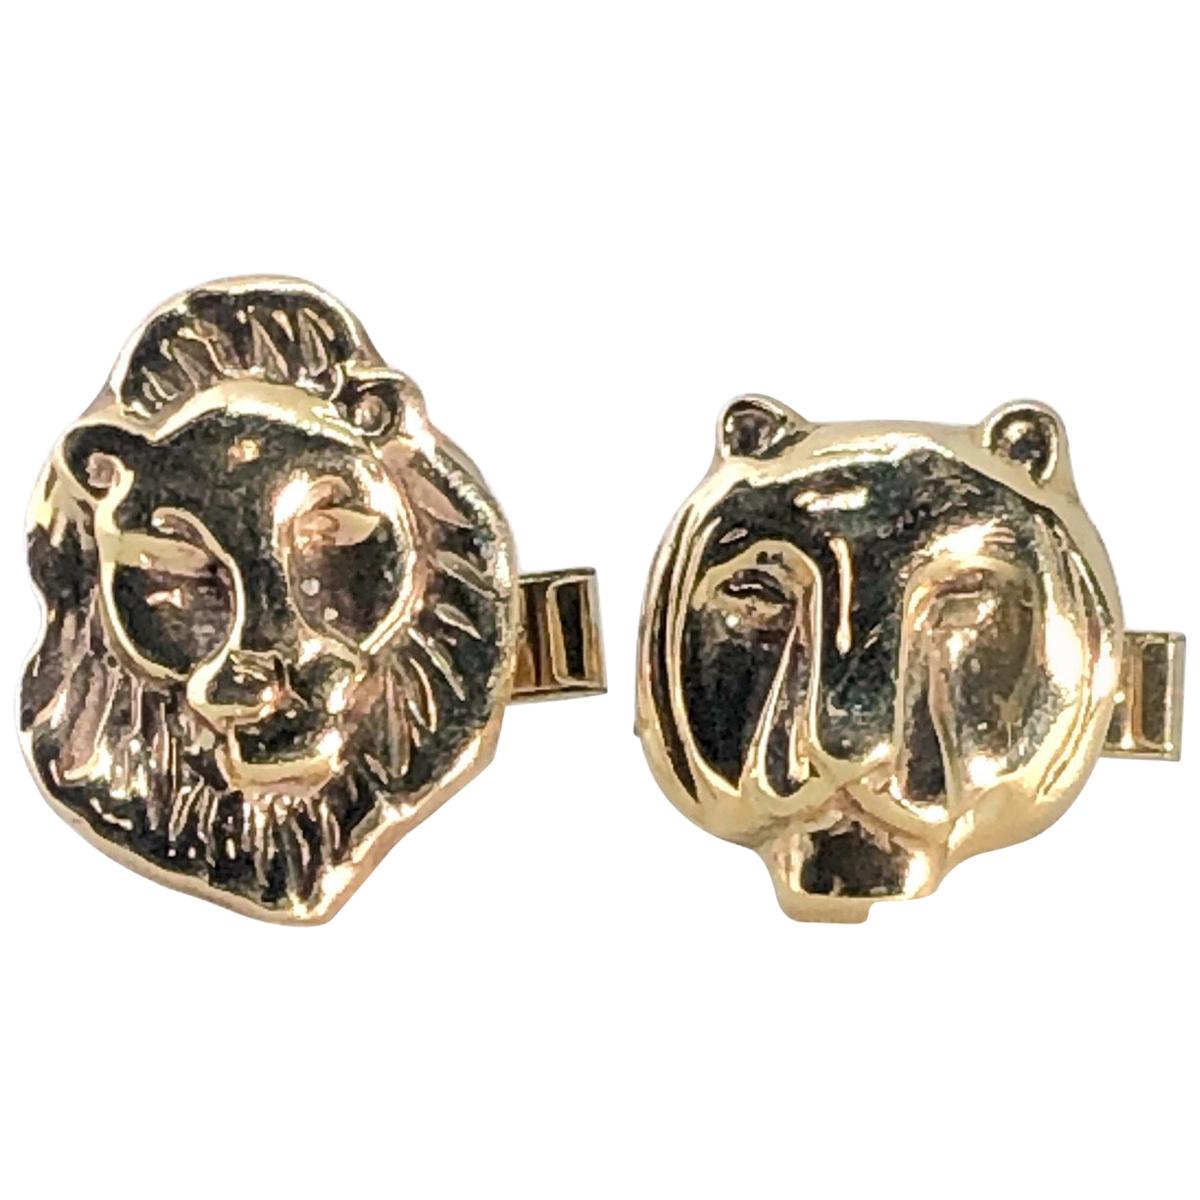 Vintage Unisex Cufflinks in Lion and Lioness Design Made in 14 Karat Yellow Gold For Sale